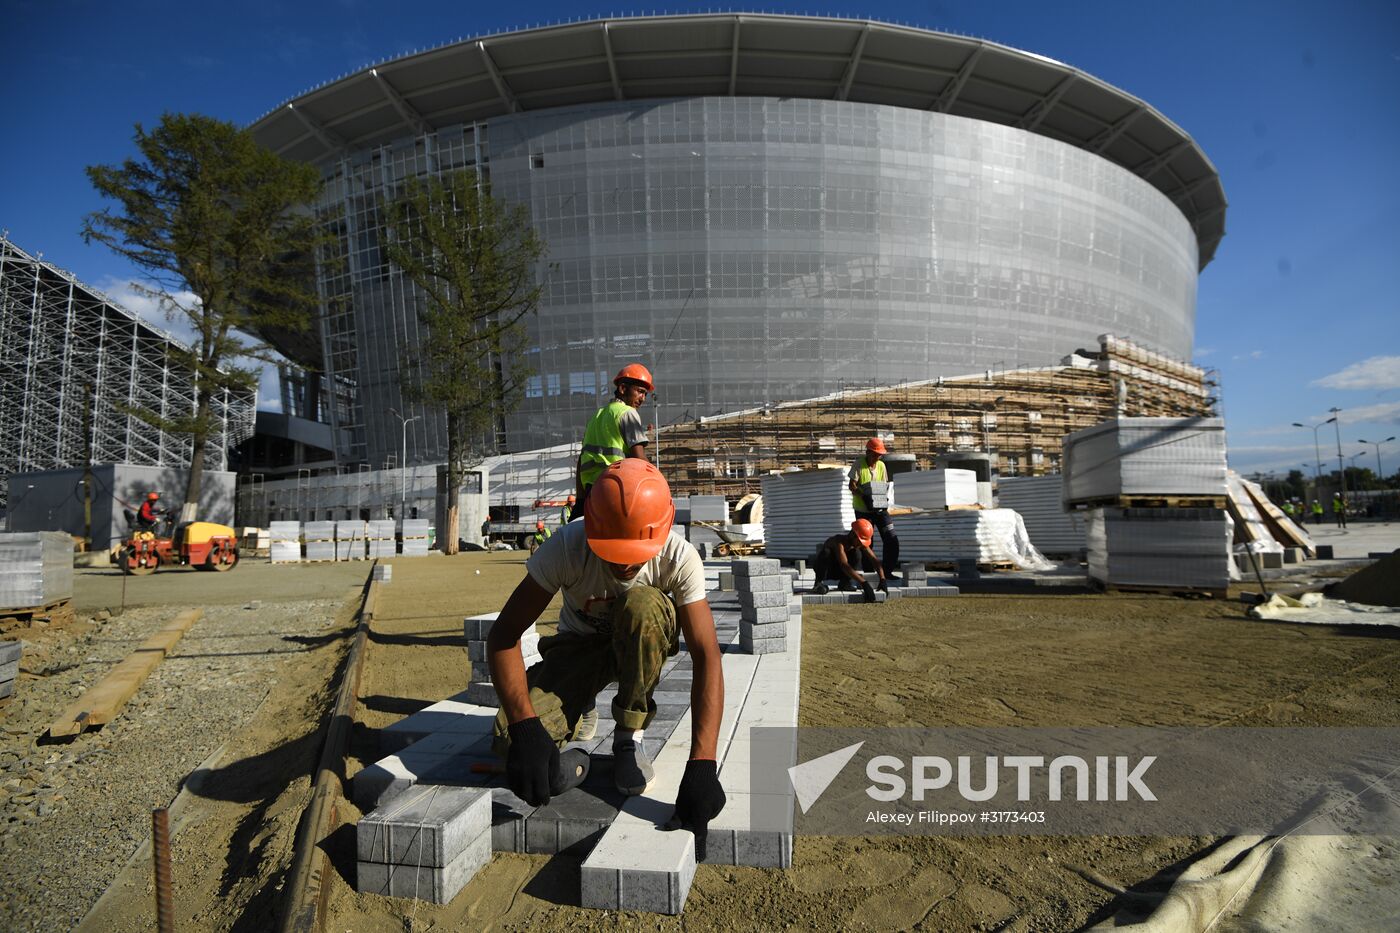 Cetral Stadium constructed in Yekaterinburg